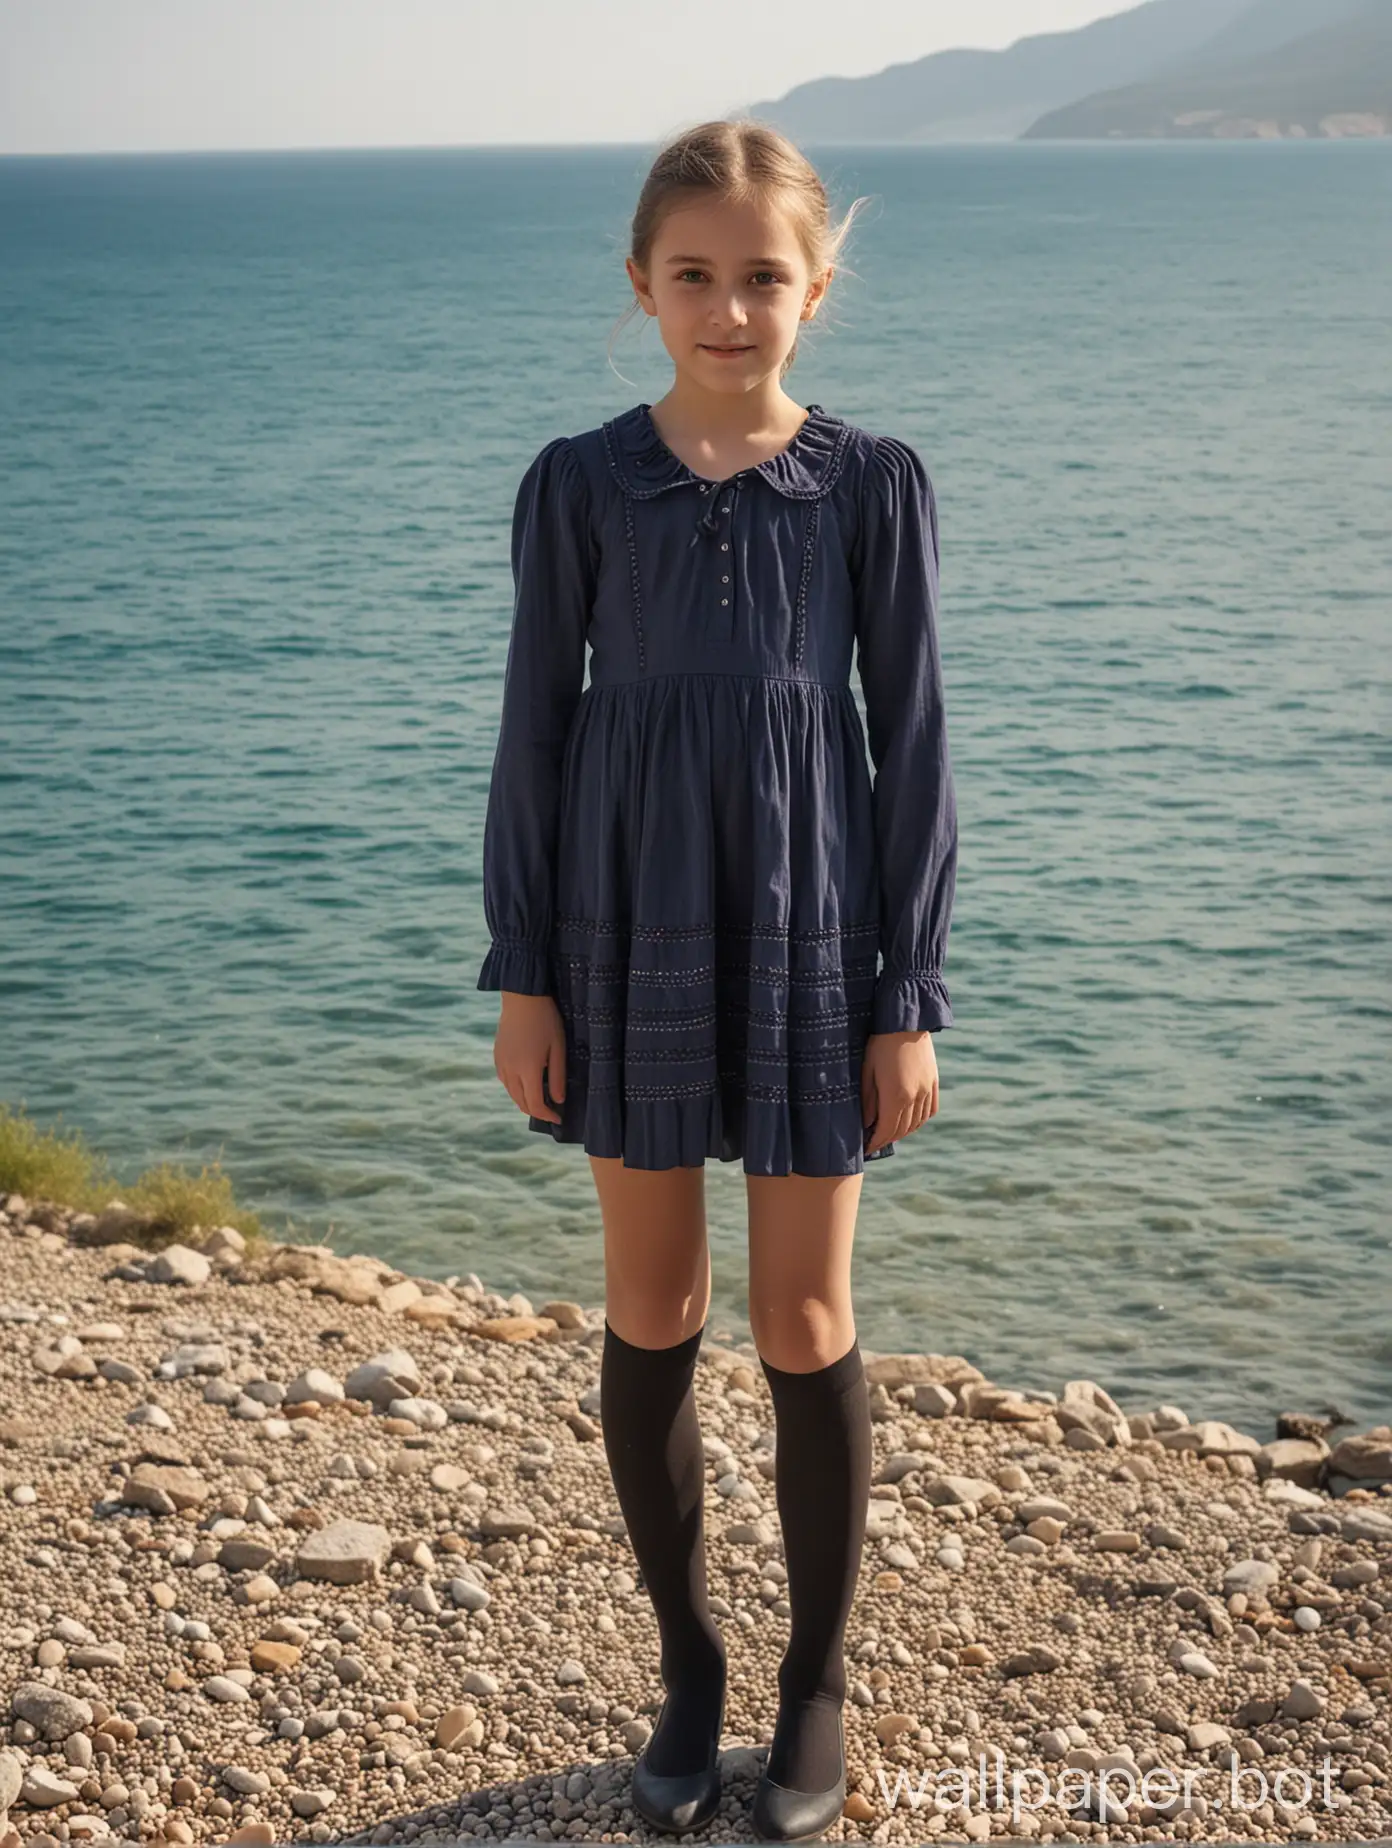 Crimea, view of the sea, a 10-year-old girl in a short dress with stockings, in full height